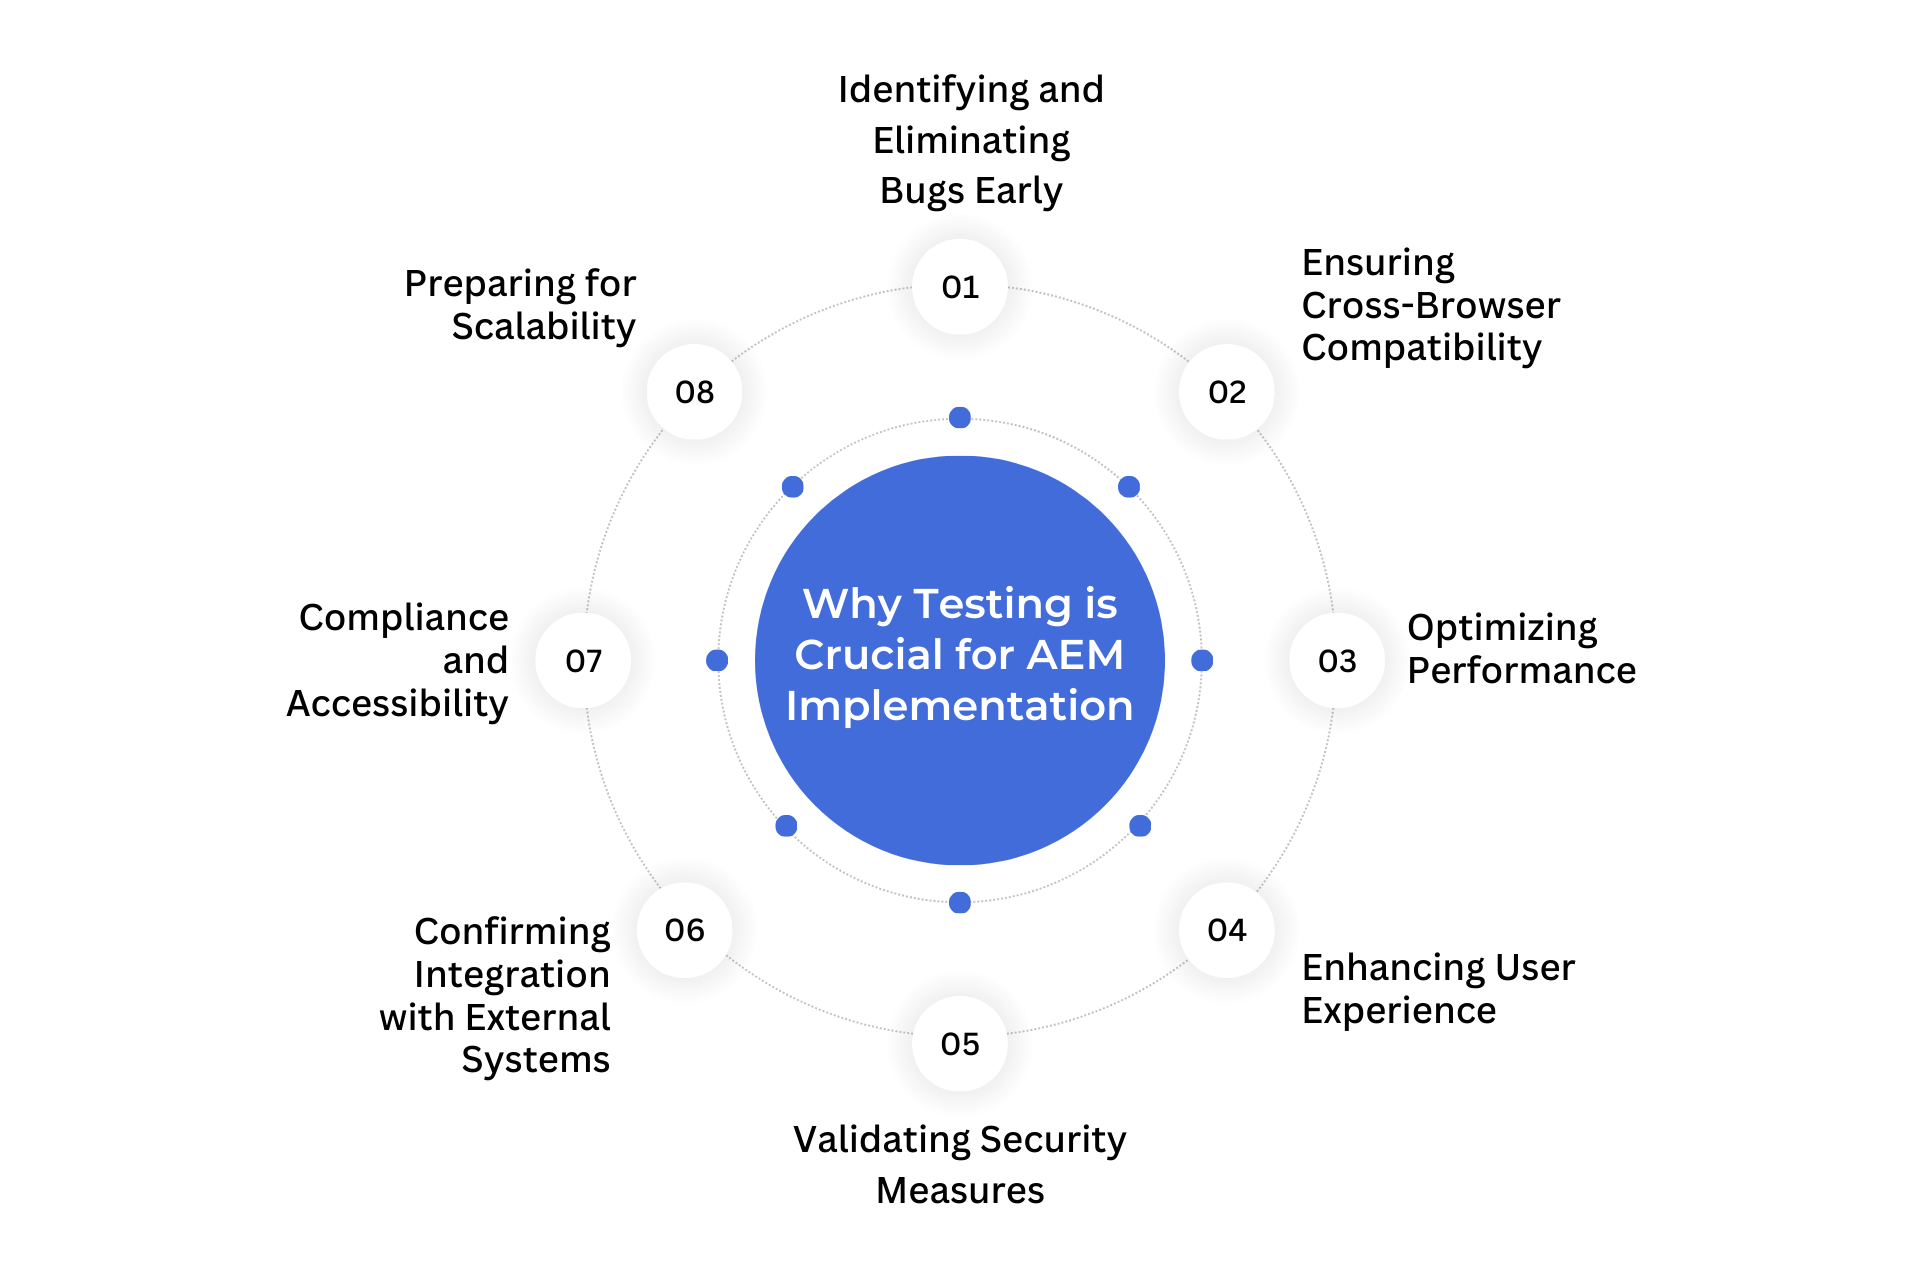 Why testing is crucial in AEM Implementation